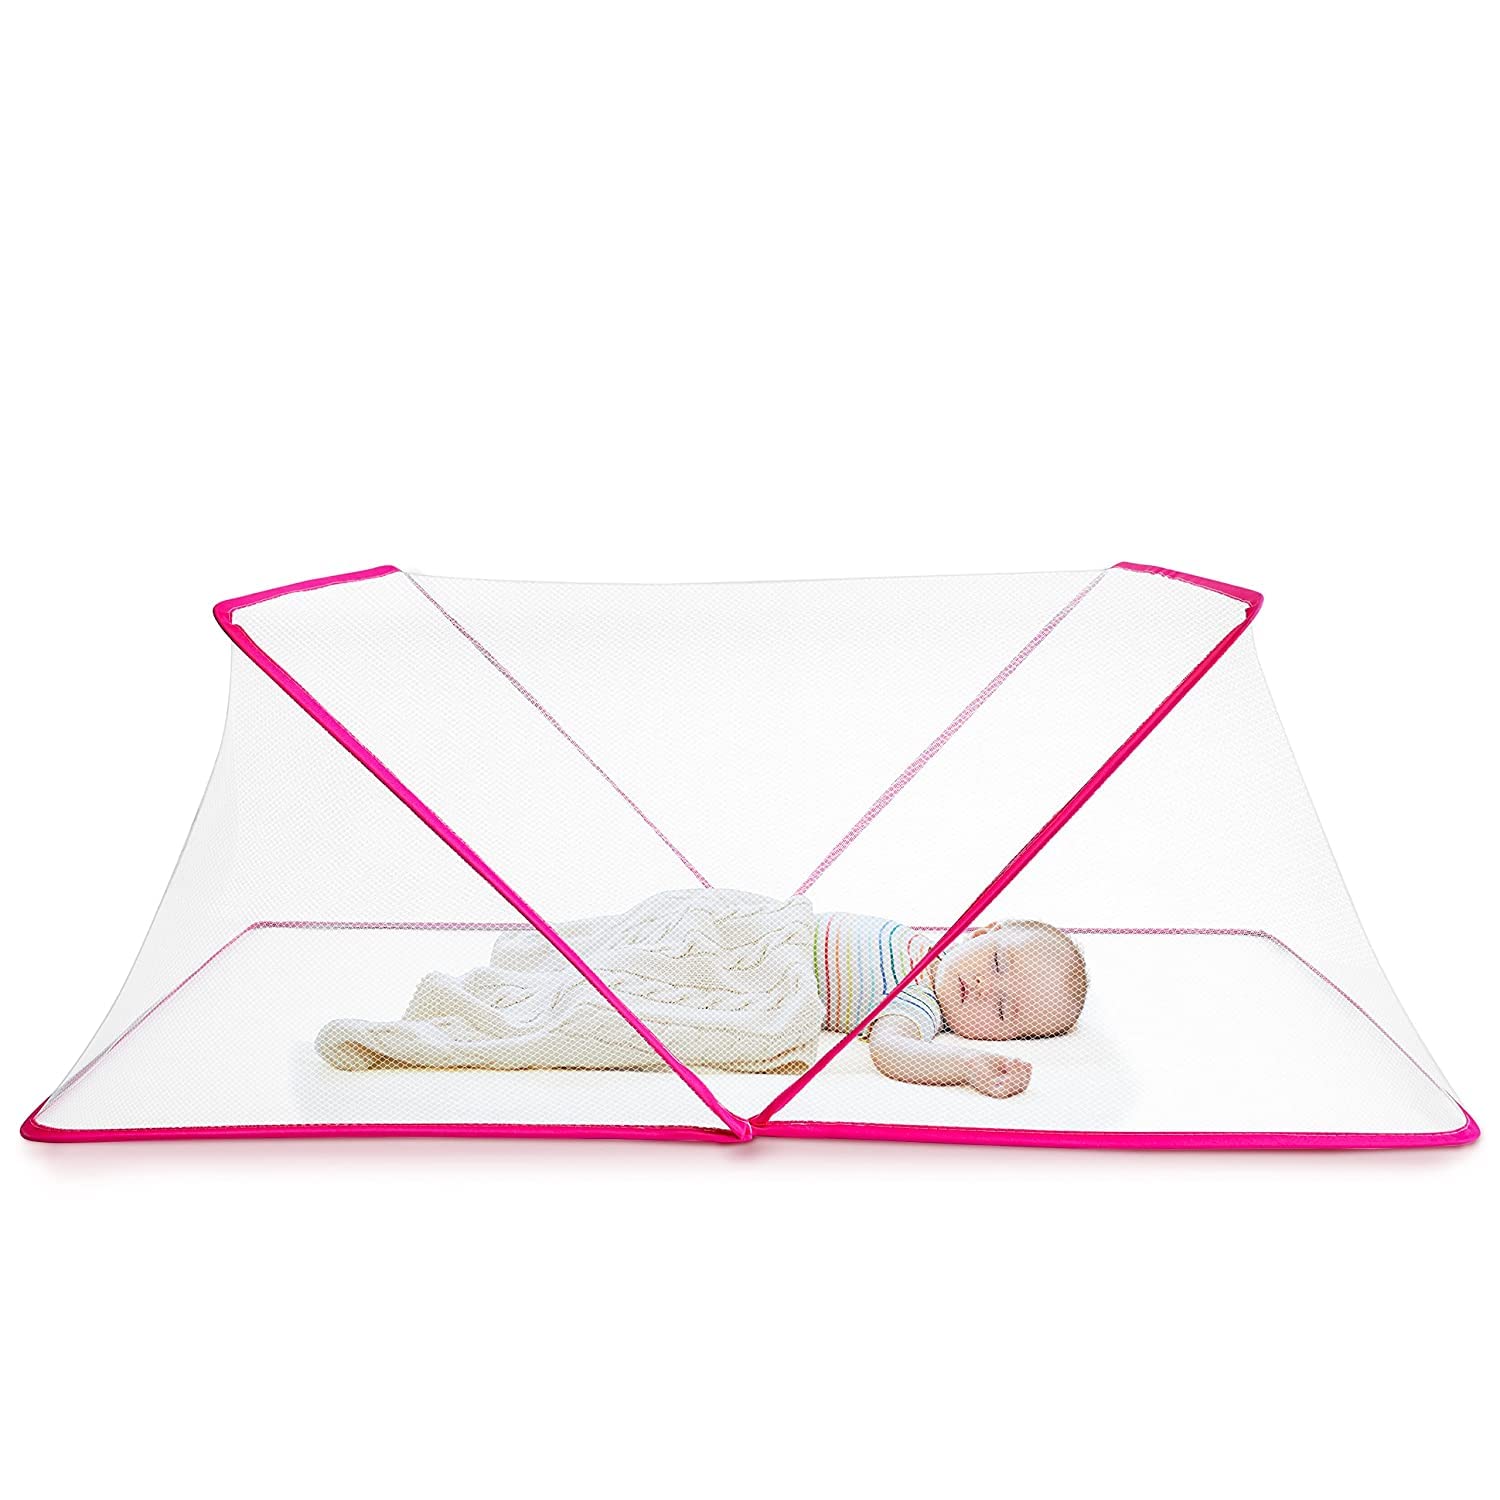 Classic Mosquito Net for Baby | Portable, Foldable, Bottomless for Infants| Easy to Use | Size 130 X 65 X 50 cms for Babies & Toddlers 0-24 Month - Pink